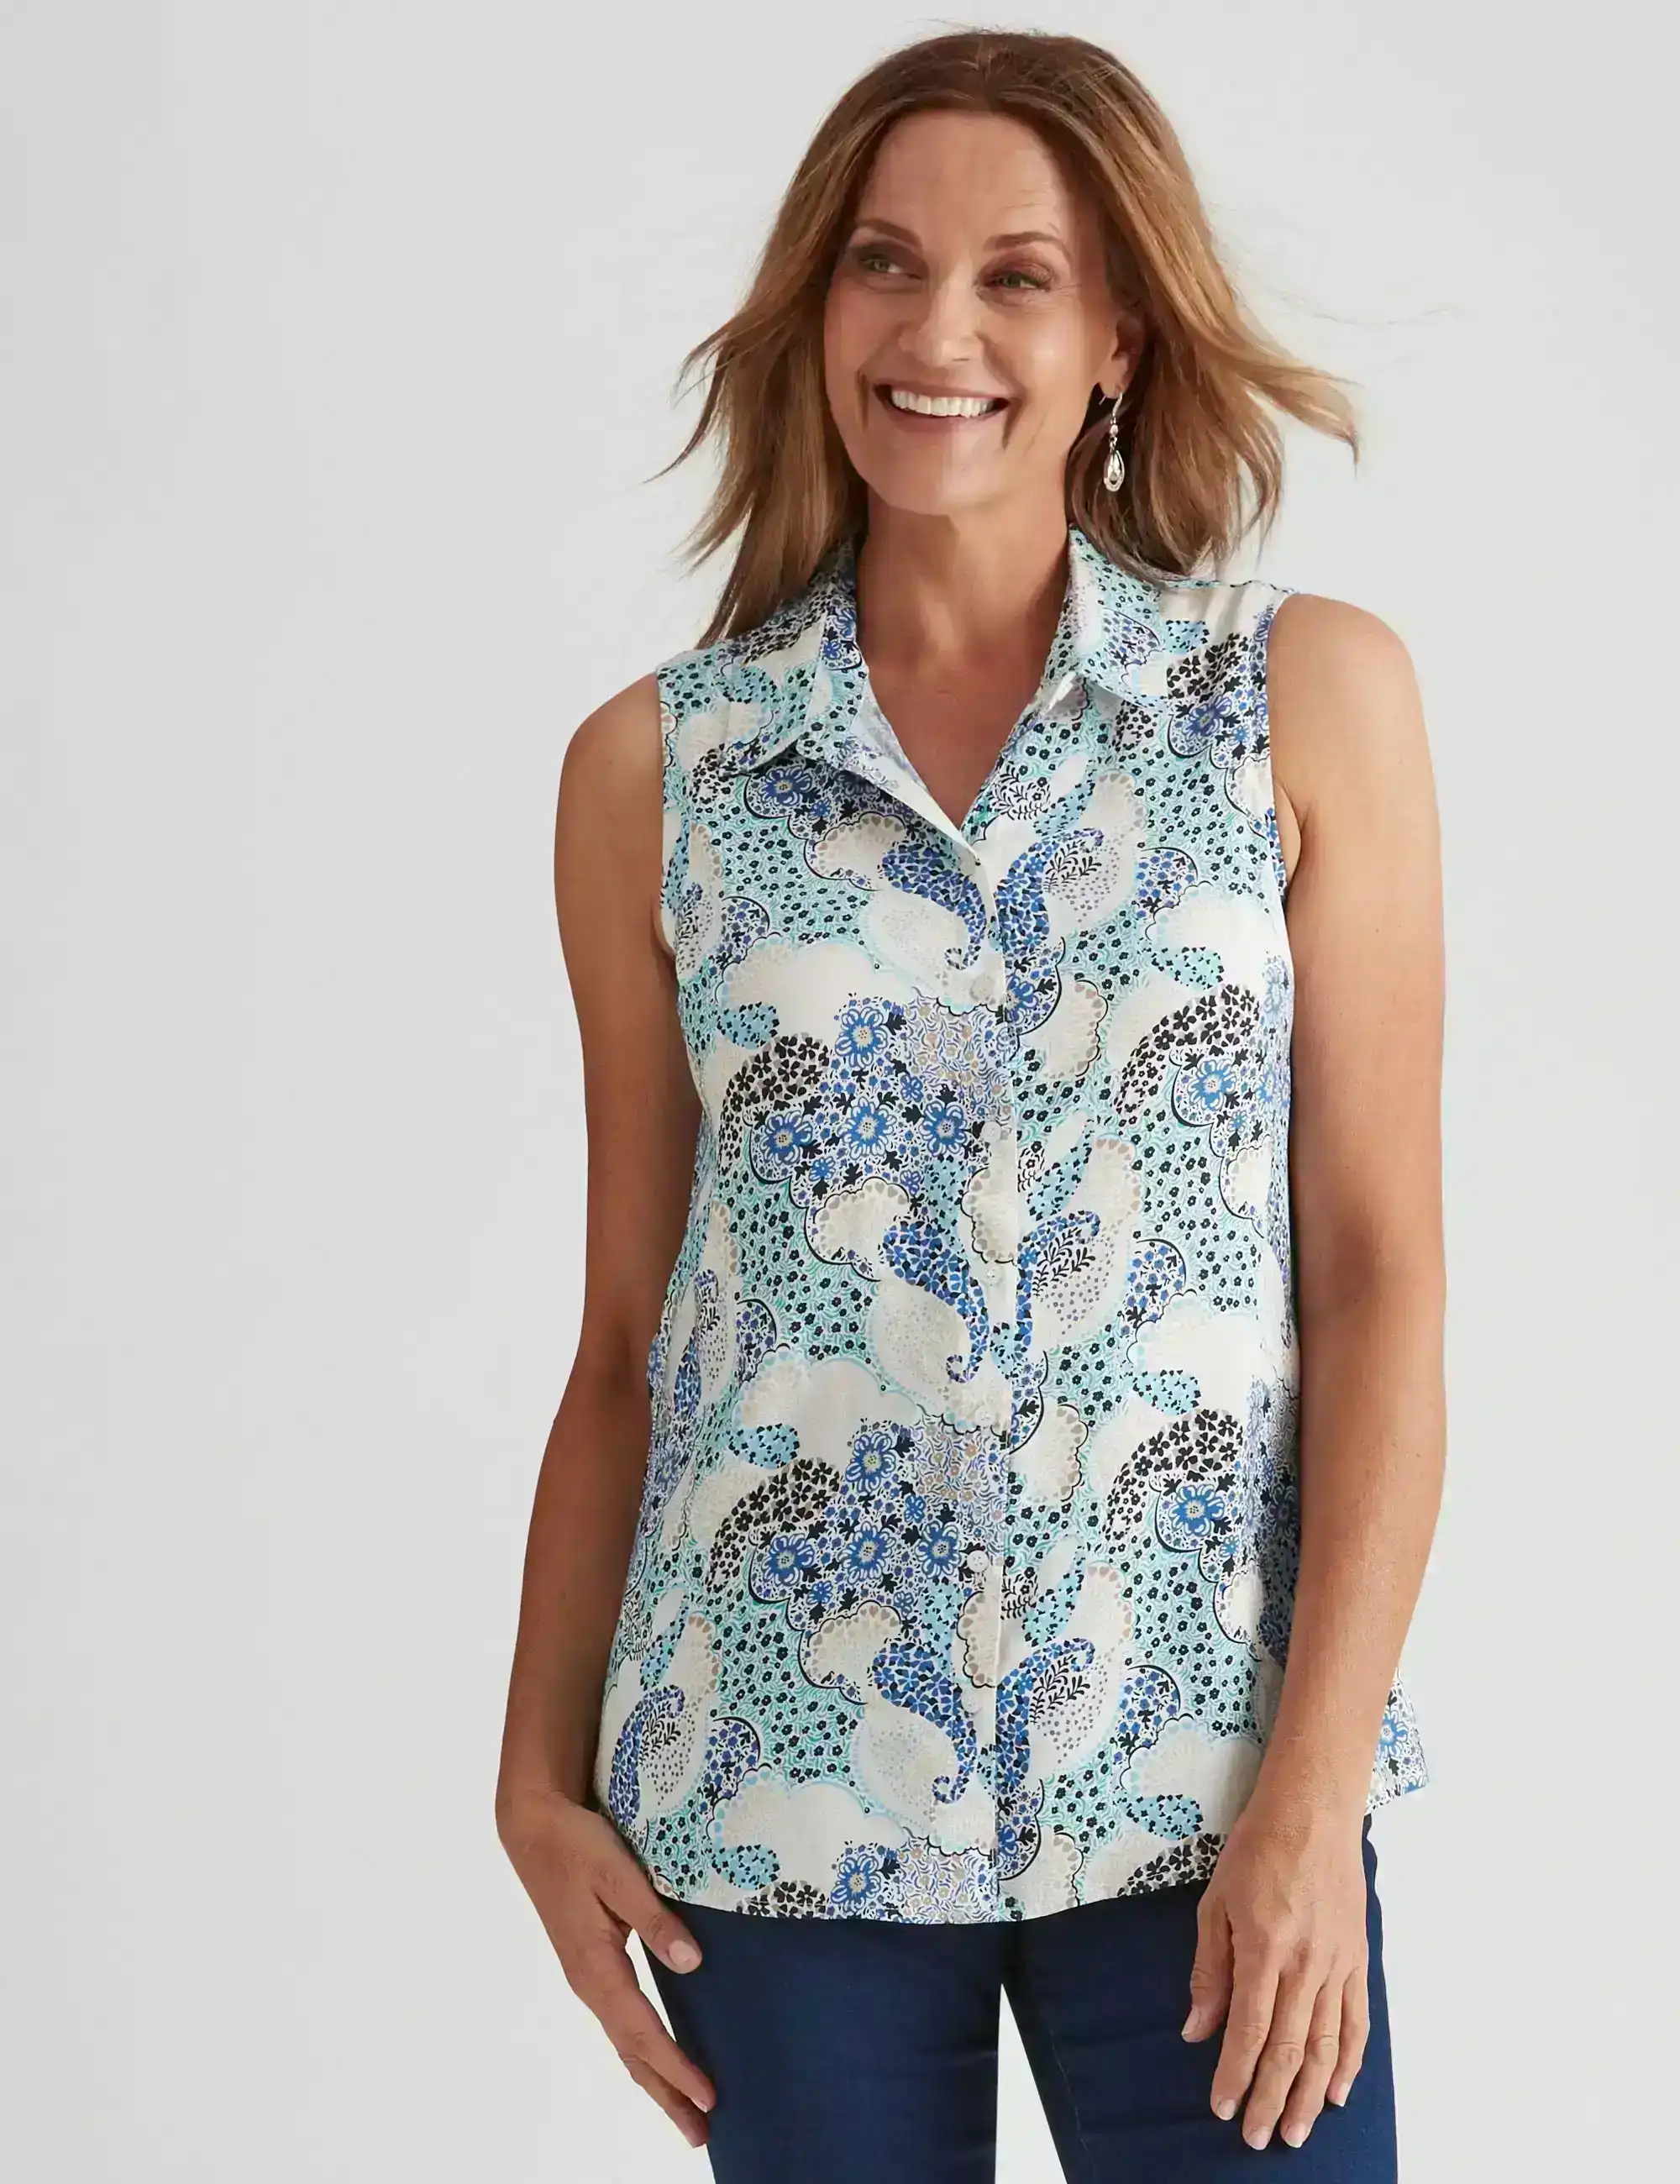 Millers Printed Sleeveless Rayon Blouse